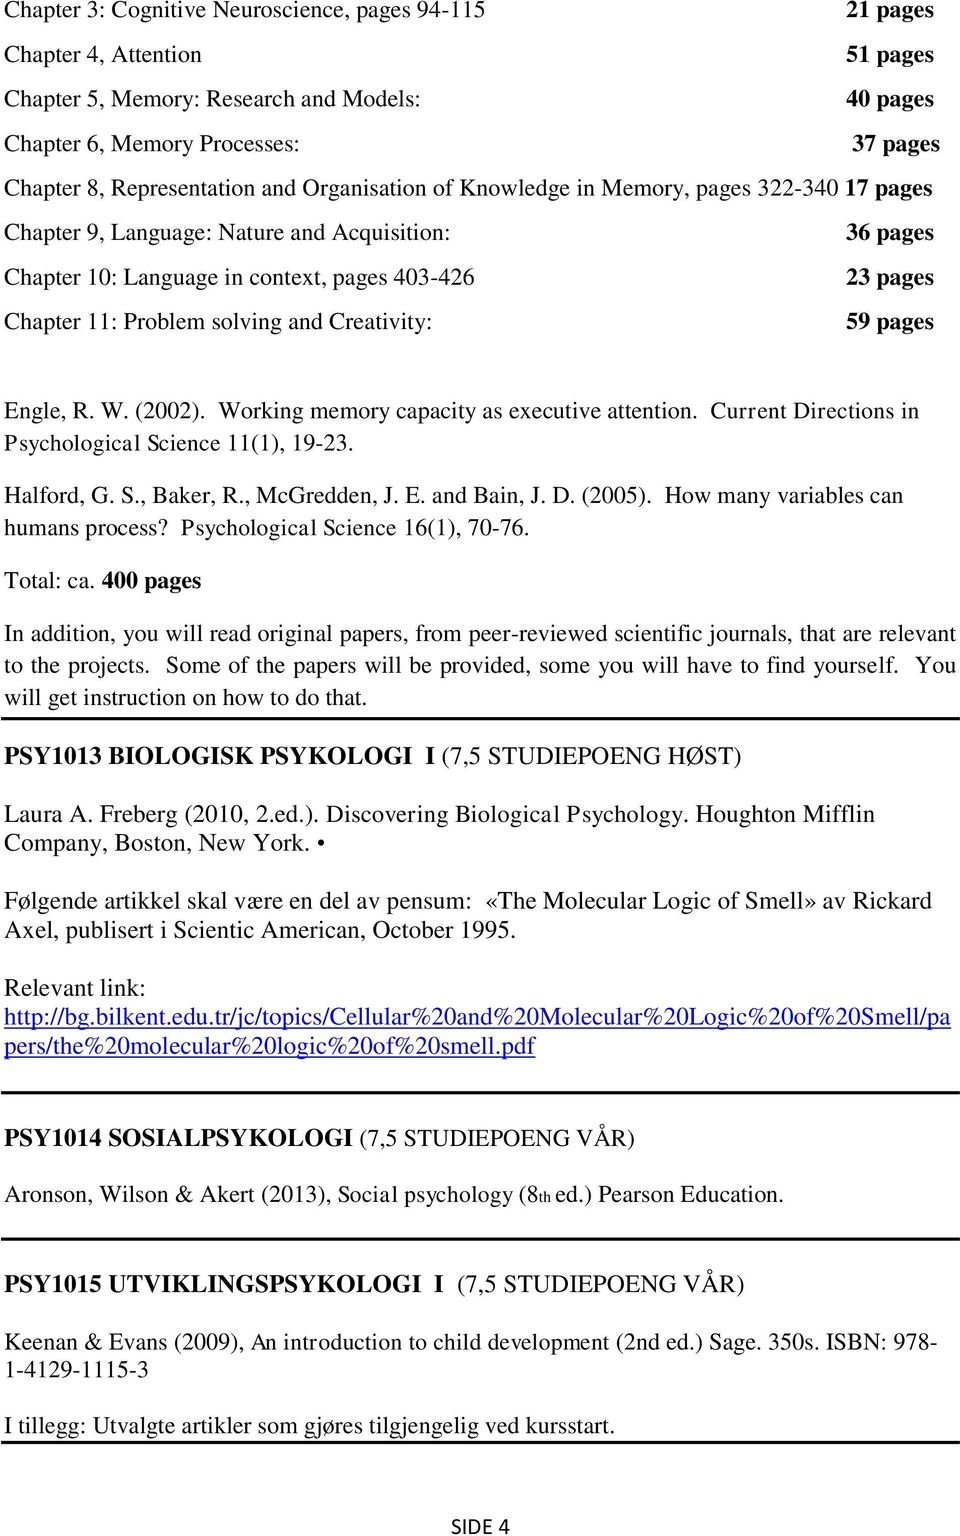 solving and Creativity: 59 pages Engle, R. W. (2002). Working memory capacity as executive attention. Current Directions in Psychological Science 11(1), 19-23. Halford, G. S., Baker, R., McGredden, J.